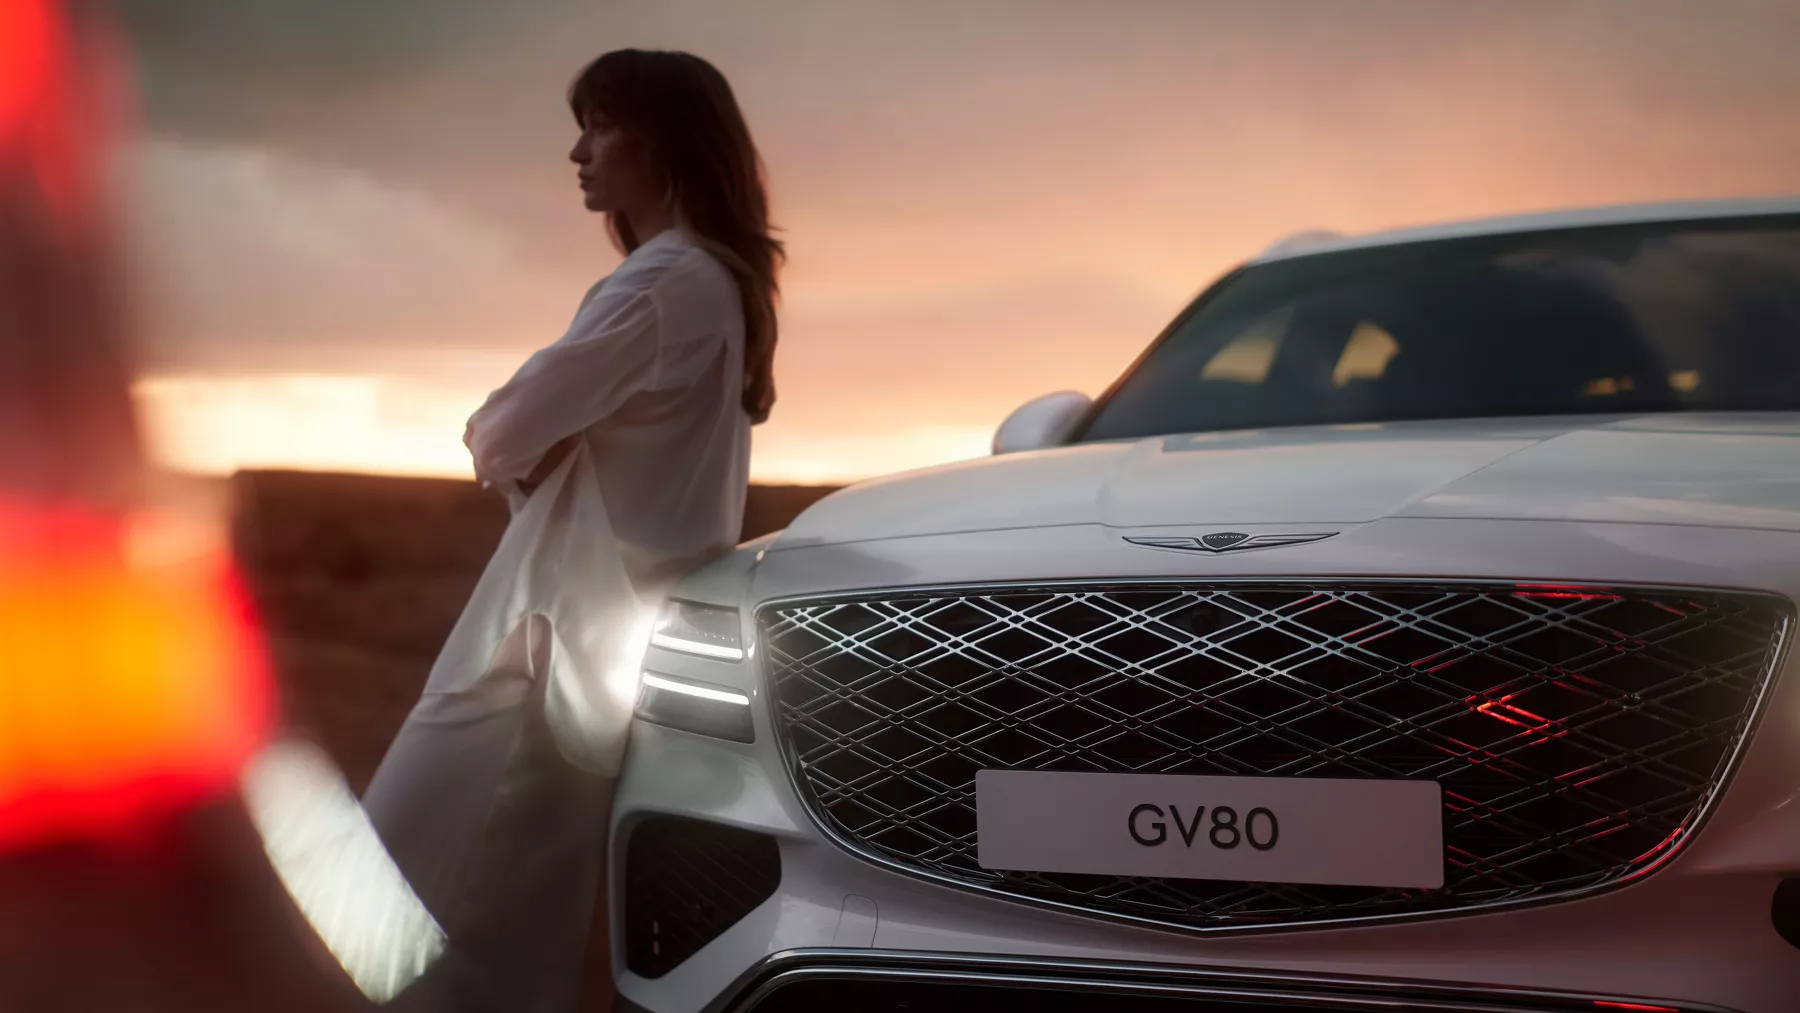 Front grille of GV80 with a woman leaning against the vehicle hood.